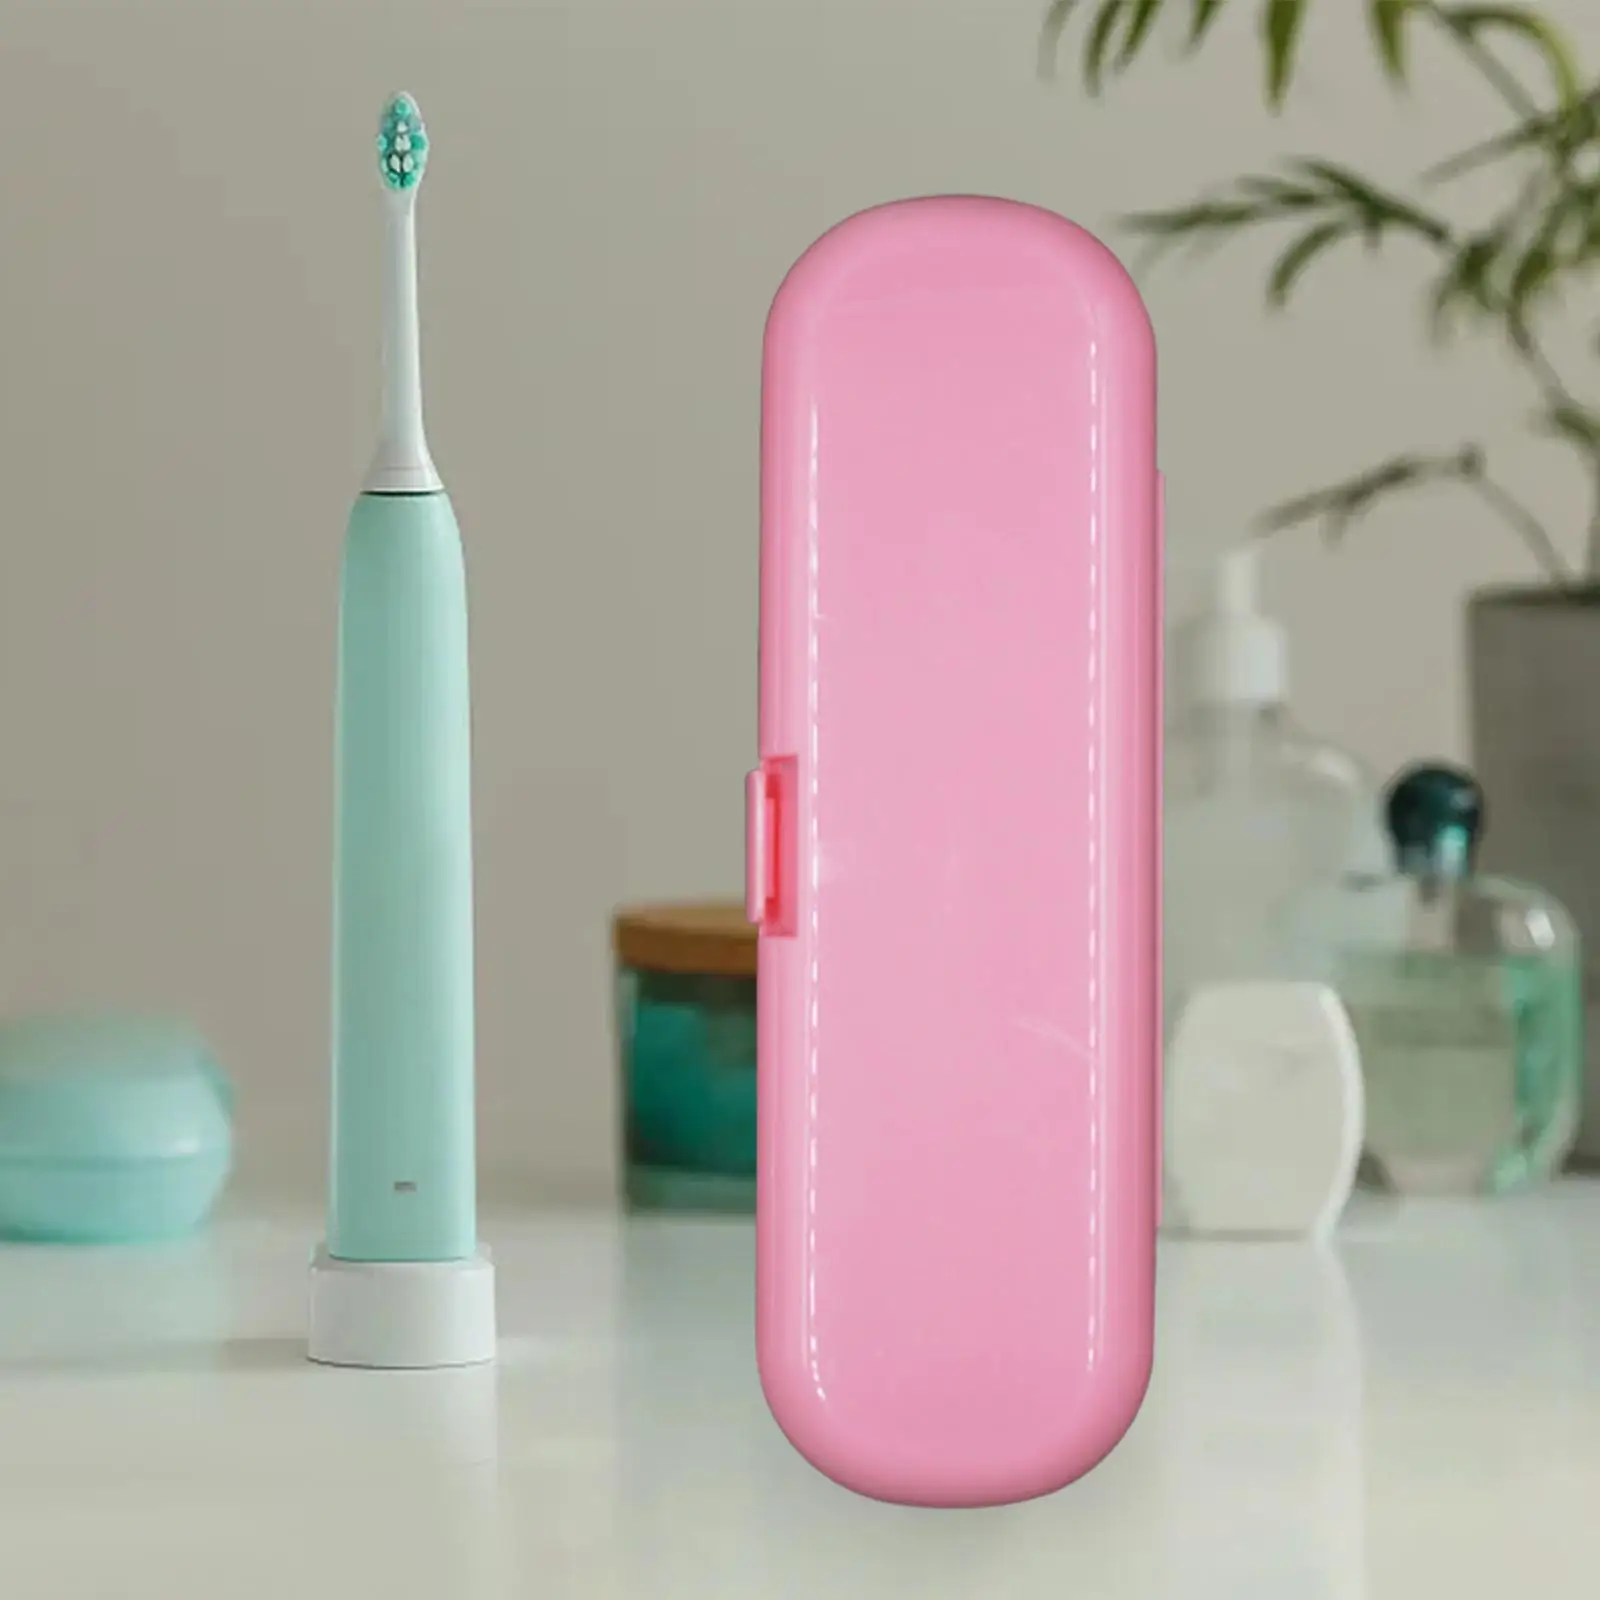 Electric Toothbrush Travel Case Compact Toothbrush Carrying Case Electric Toothbrush Holder Protective Cover for Traveling